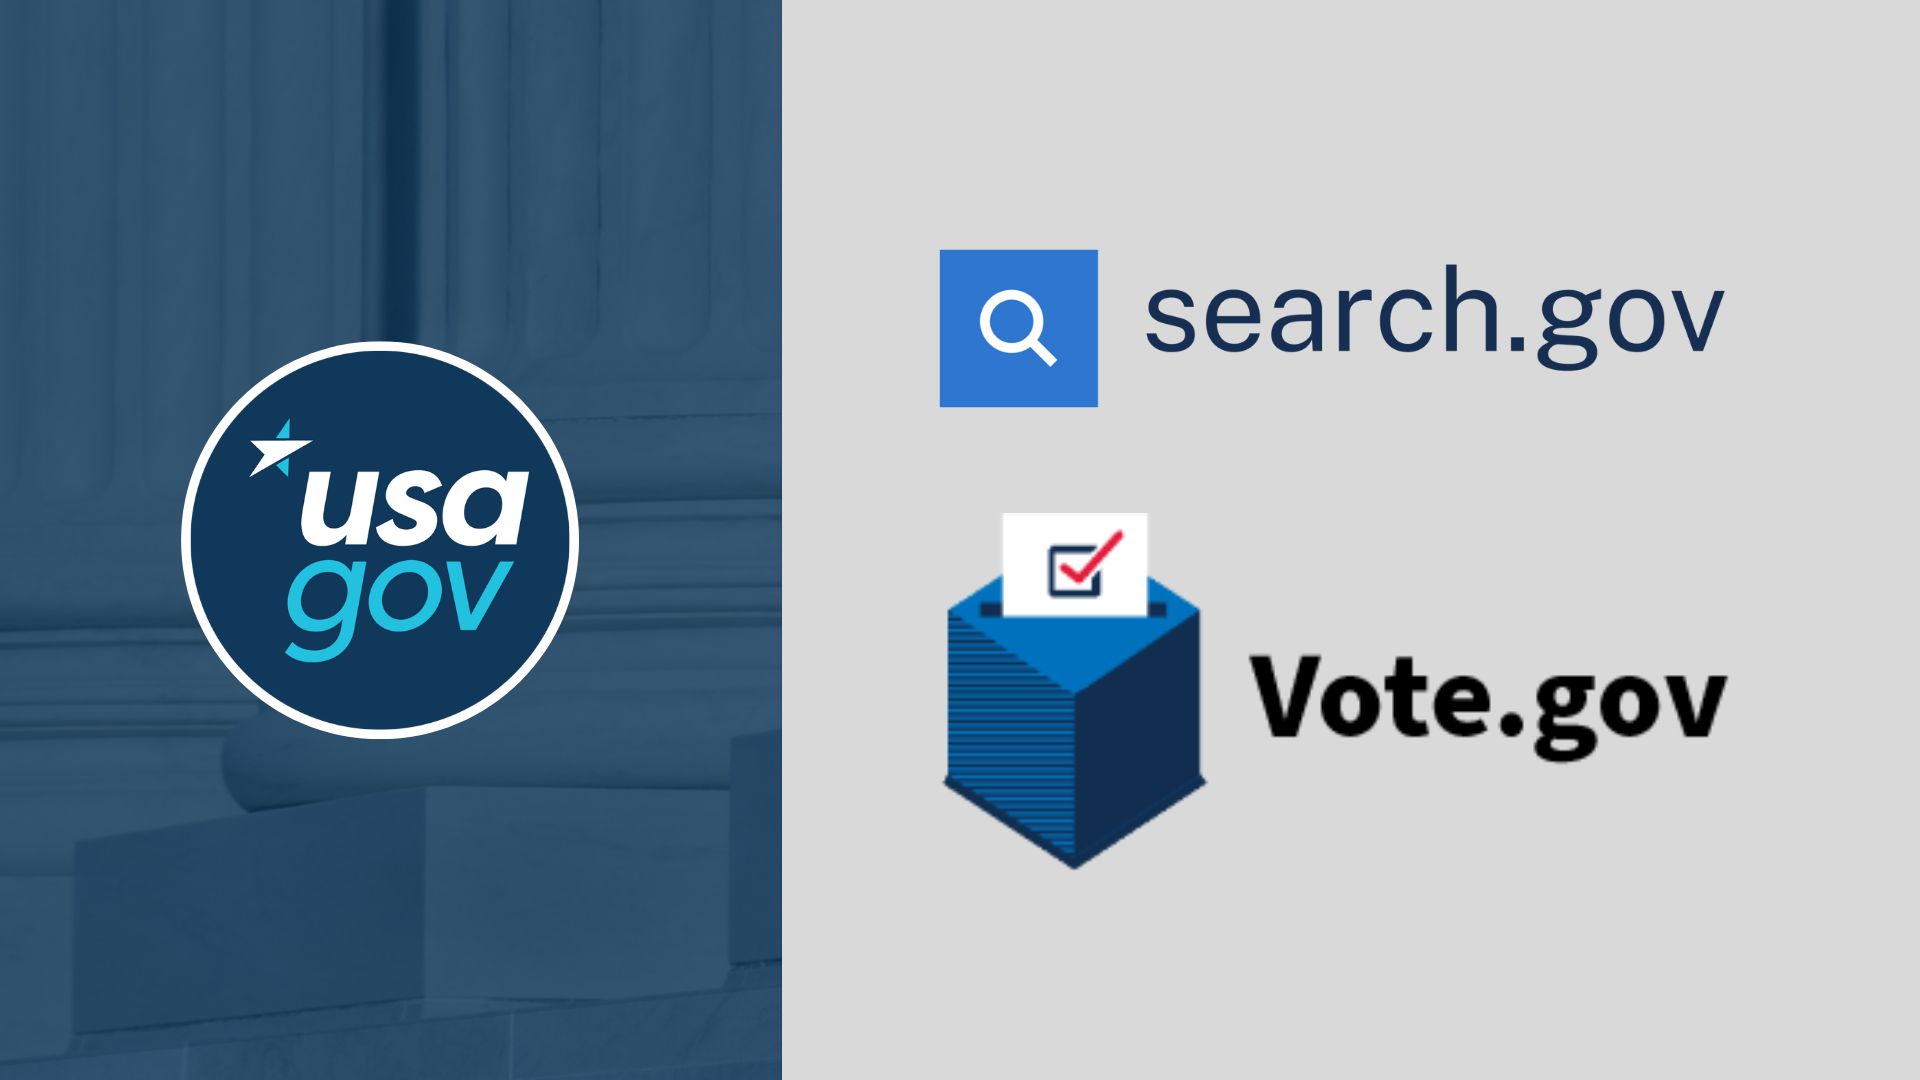 USAGov logo on the left with a blue background. Search.gov and Vote.gov logos stacked on top of one another on the right. 